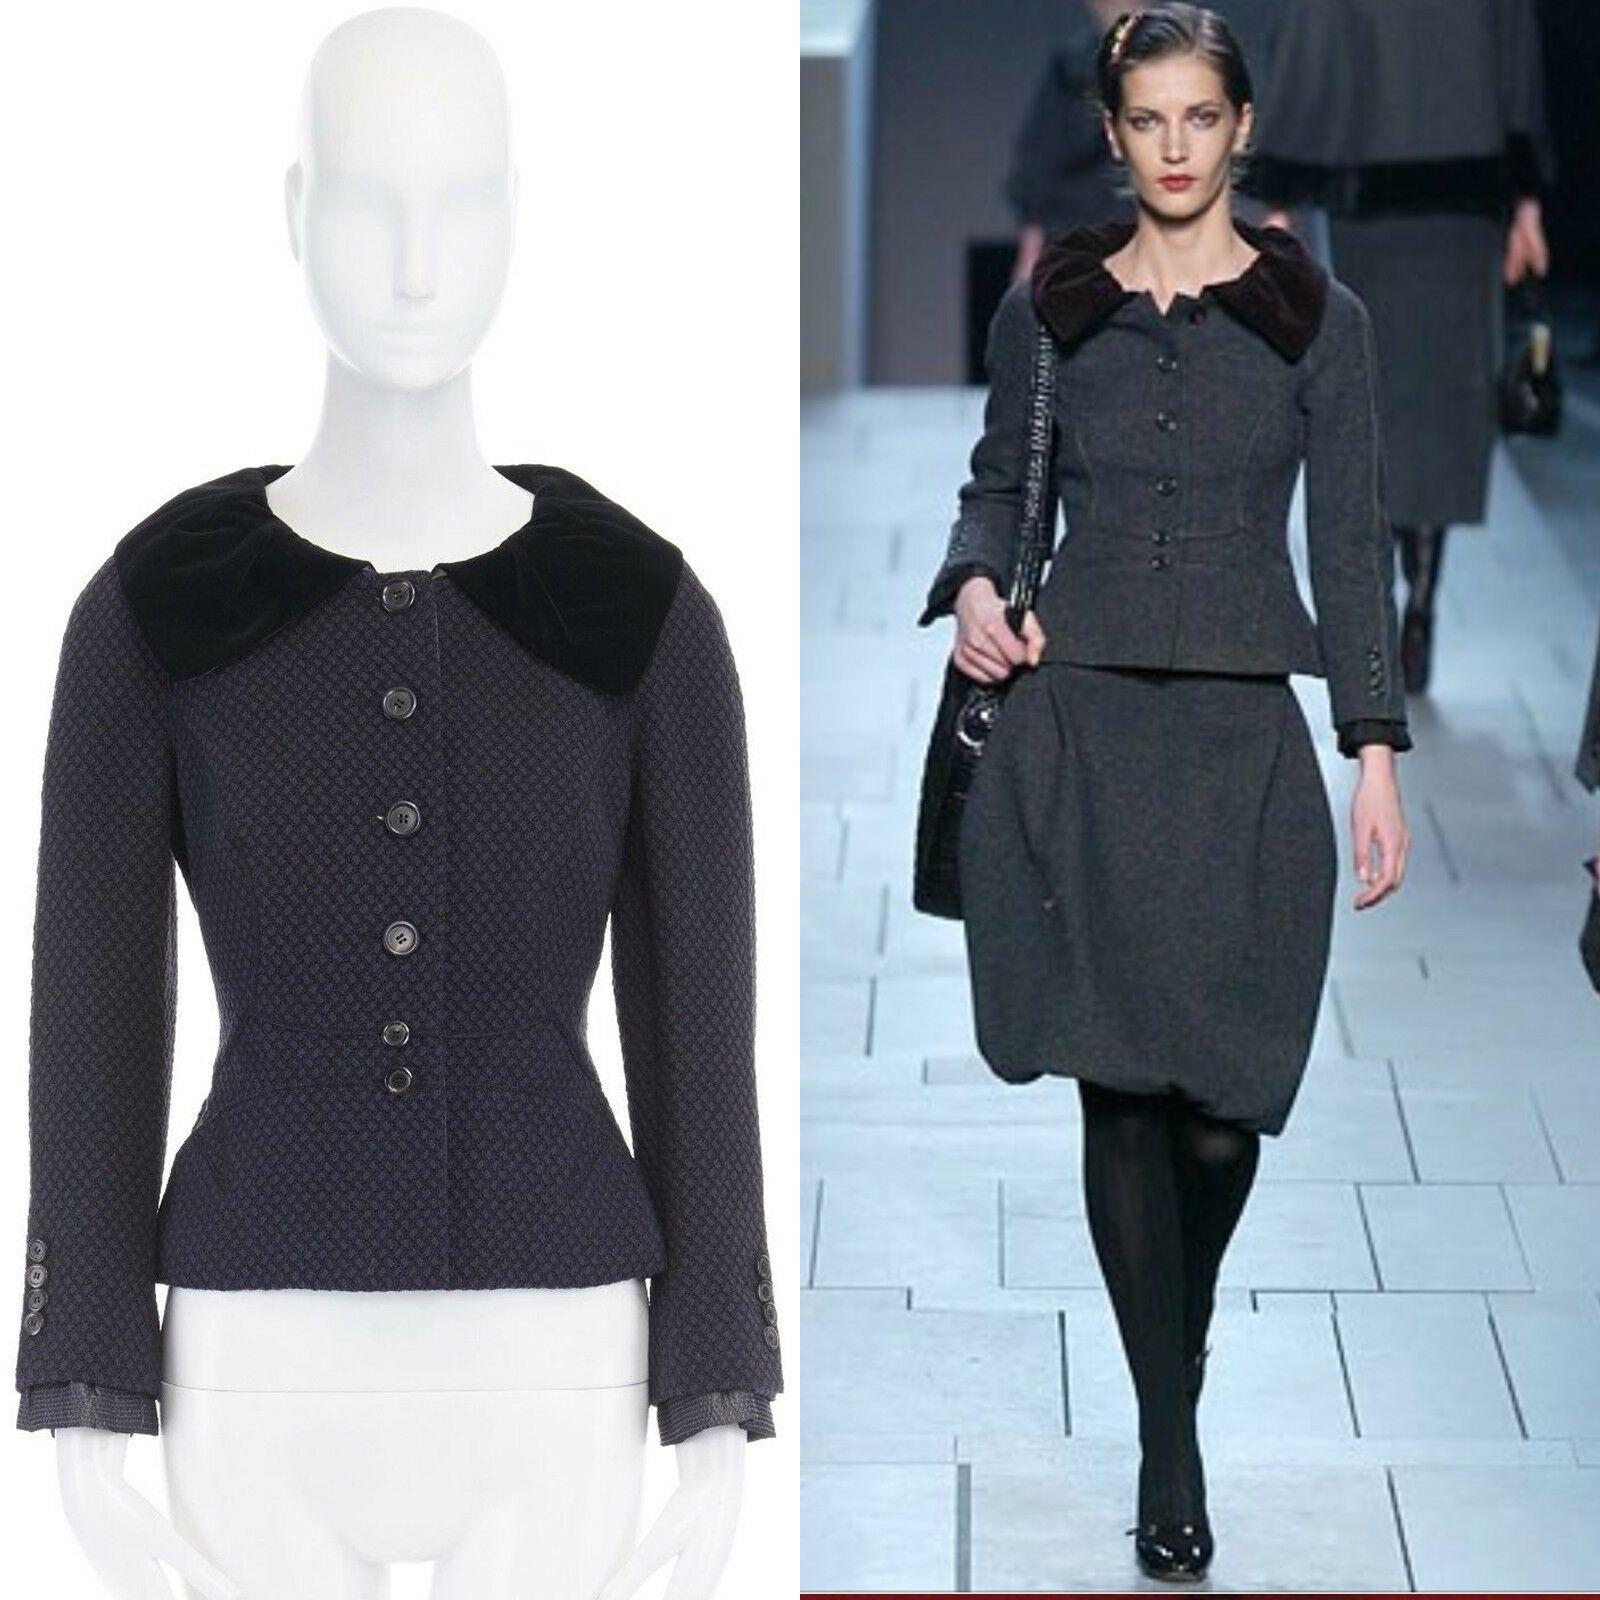 runway LOUIS VUITTON MARC JACOBS AW06 velvet collar navy jacquard jacket FR34 XS

LOUIS VUITTON by MARC JACOBS
FROM THE FALL WINTER 2006 RUNWAY
Navy blue wool, viscose, cotton, elastane, silk . 
Navy blue and black textured jacquard . Contoured